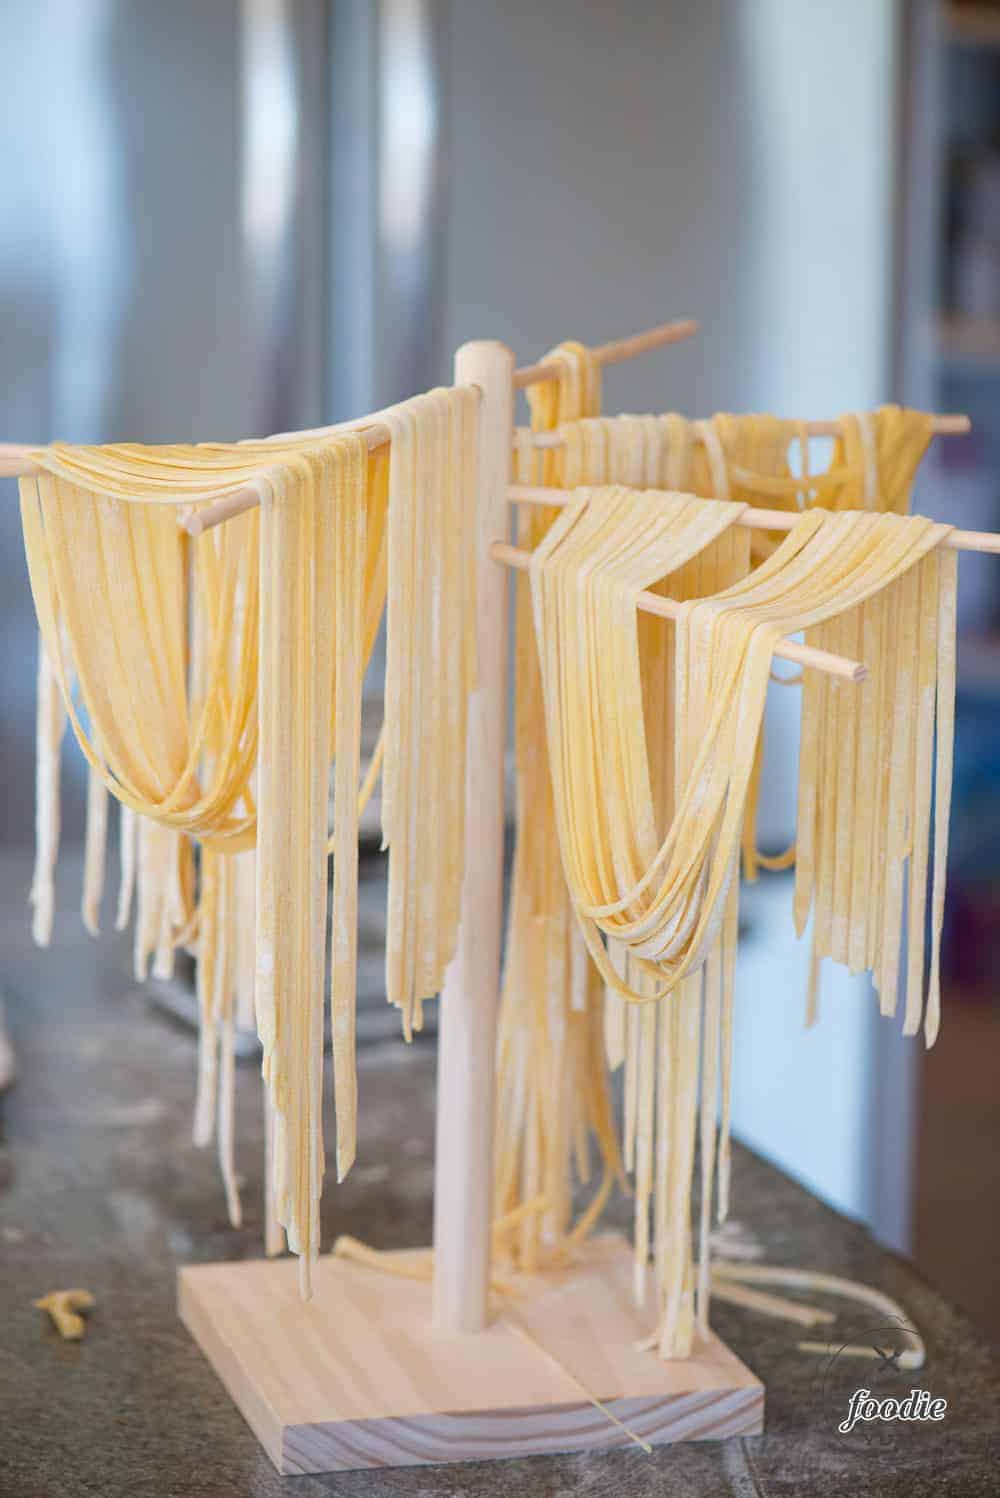 How to make pasta from scratch